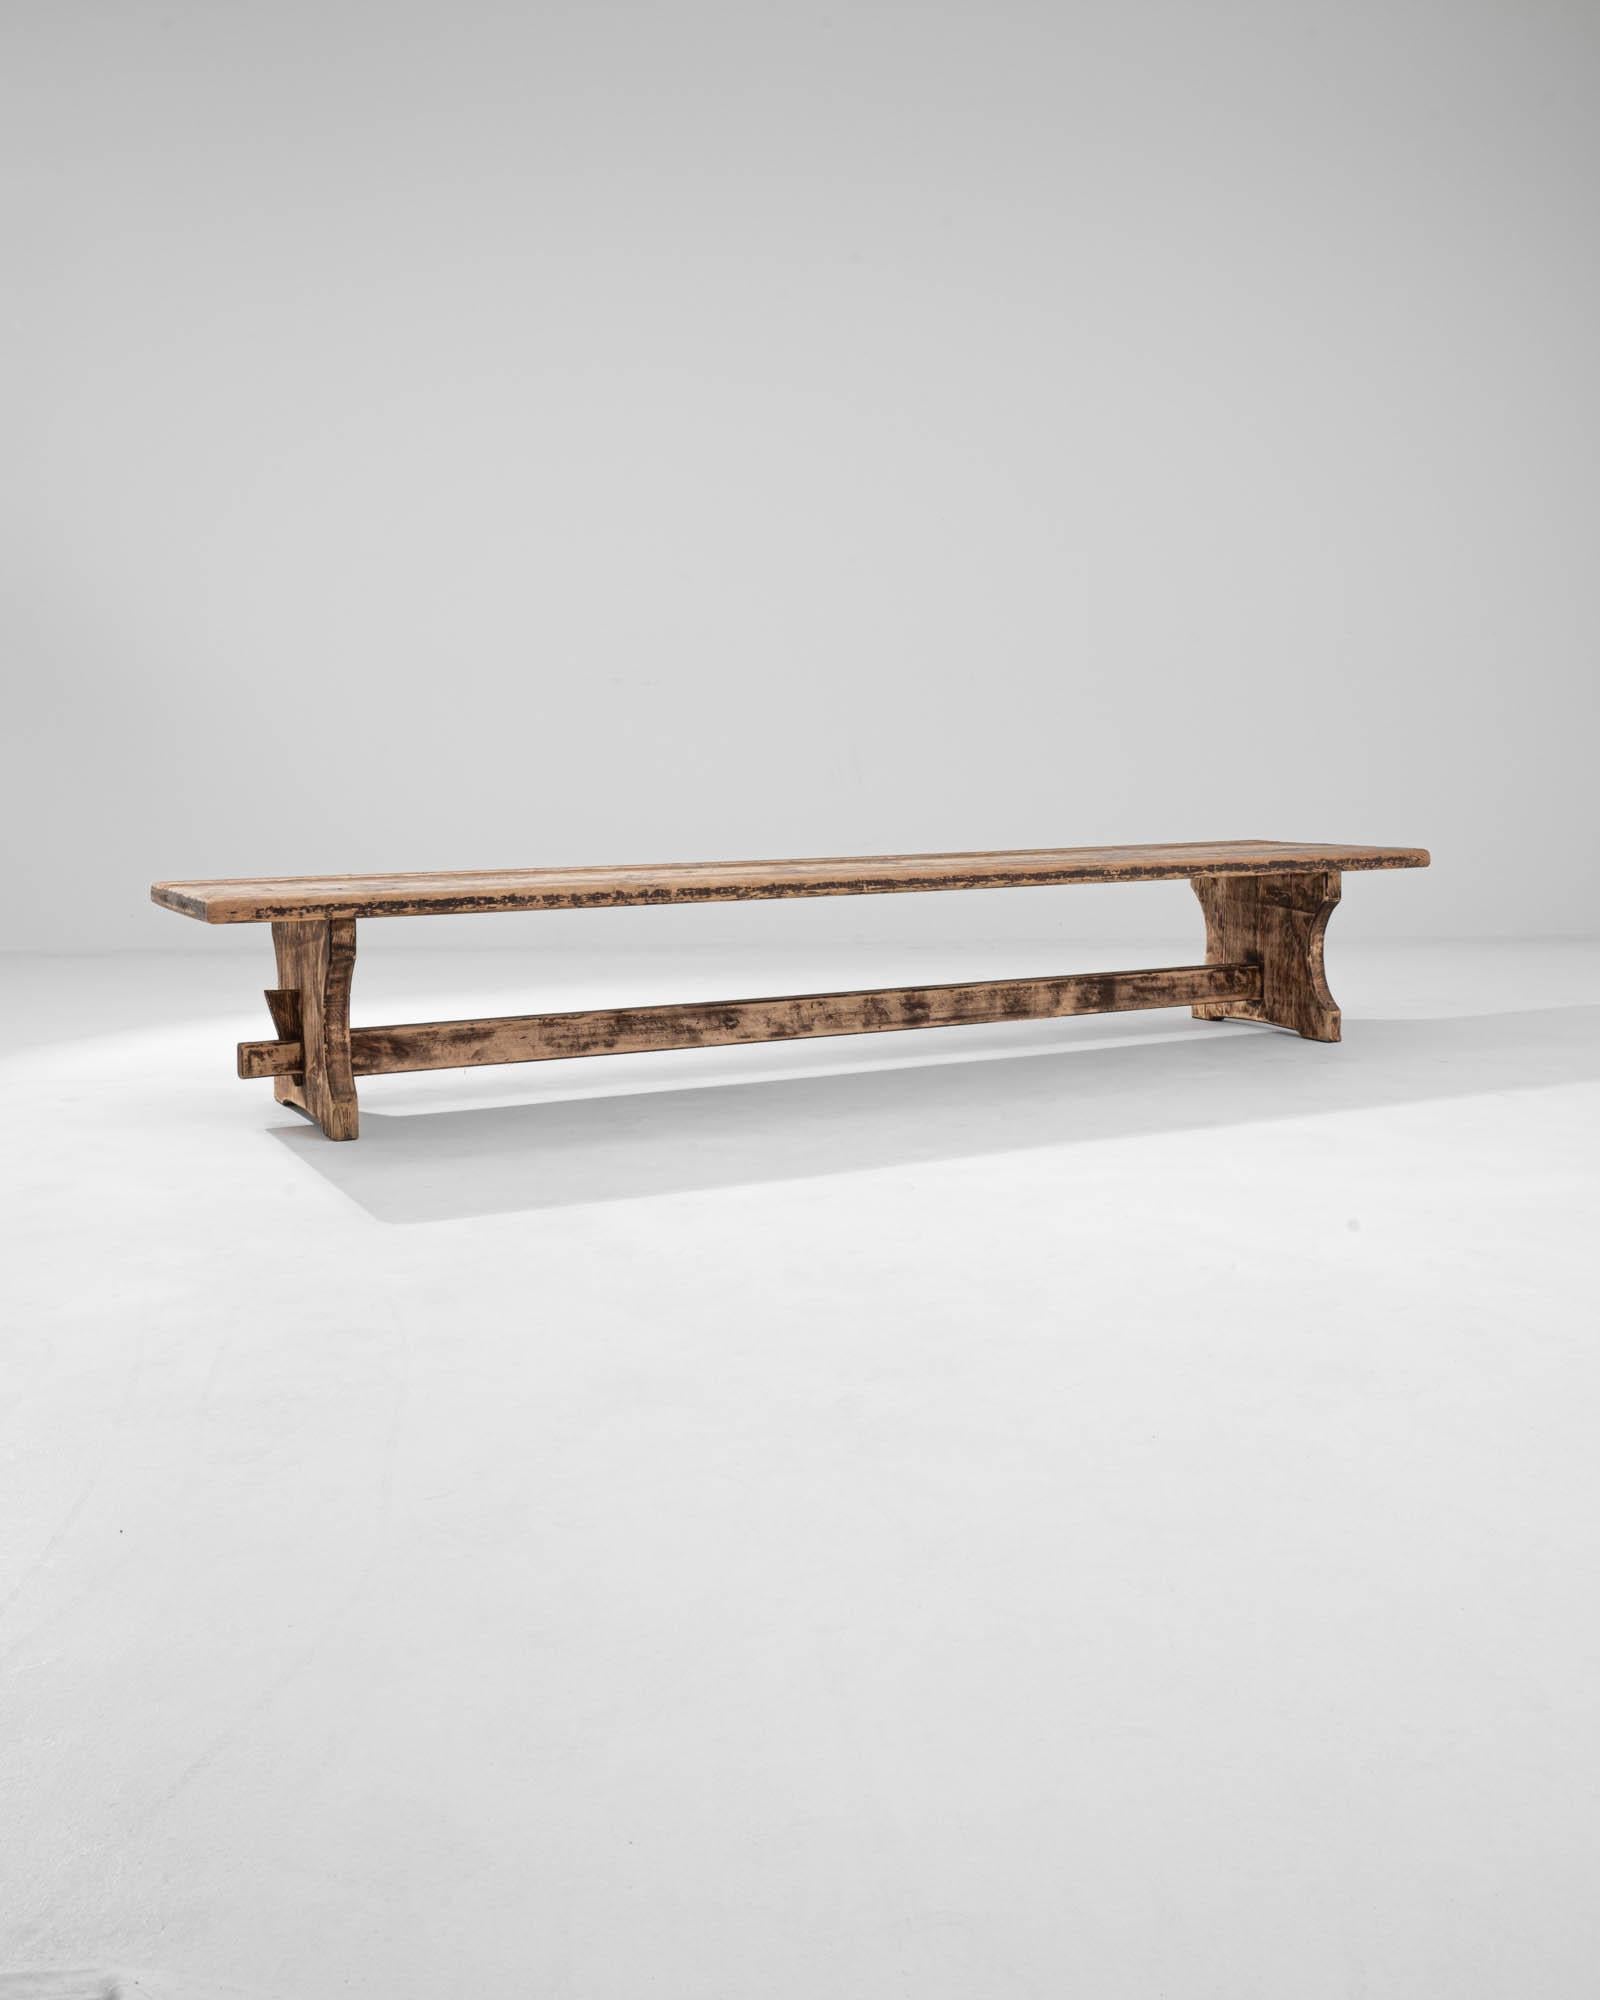 A simple shape combined with a timeworn patina make this Provincial wooden bench an attractive find. Built in France in the early 20th century, a long seat of wooden boards rests atop trestle legs, joined by a stretcher. Mortise and tenon joints